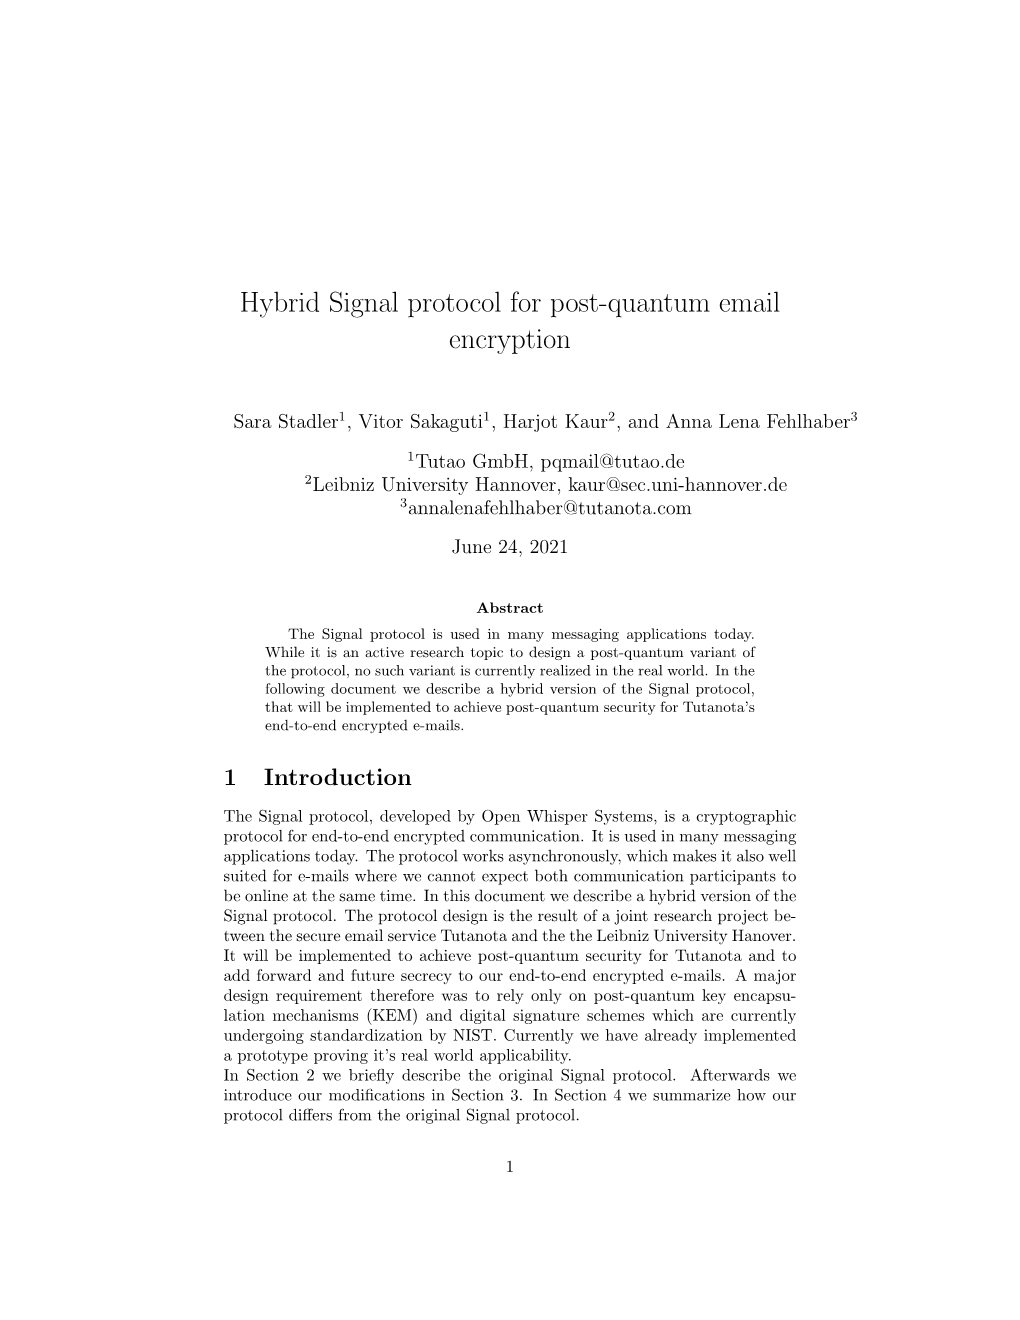 Hybrid Signal Protocol for Post-Quantum Email Encryption